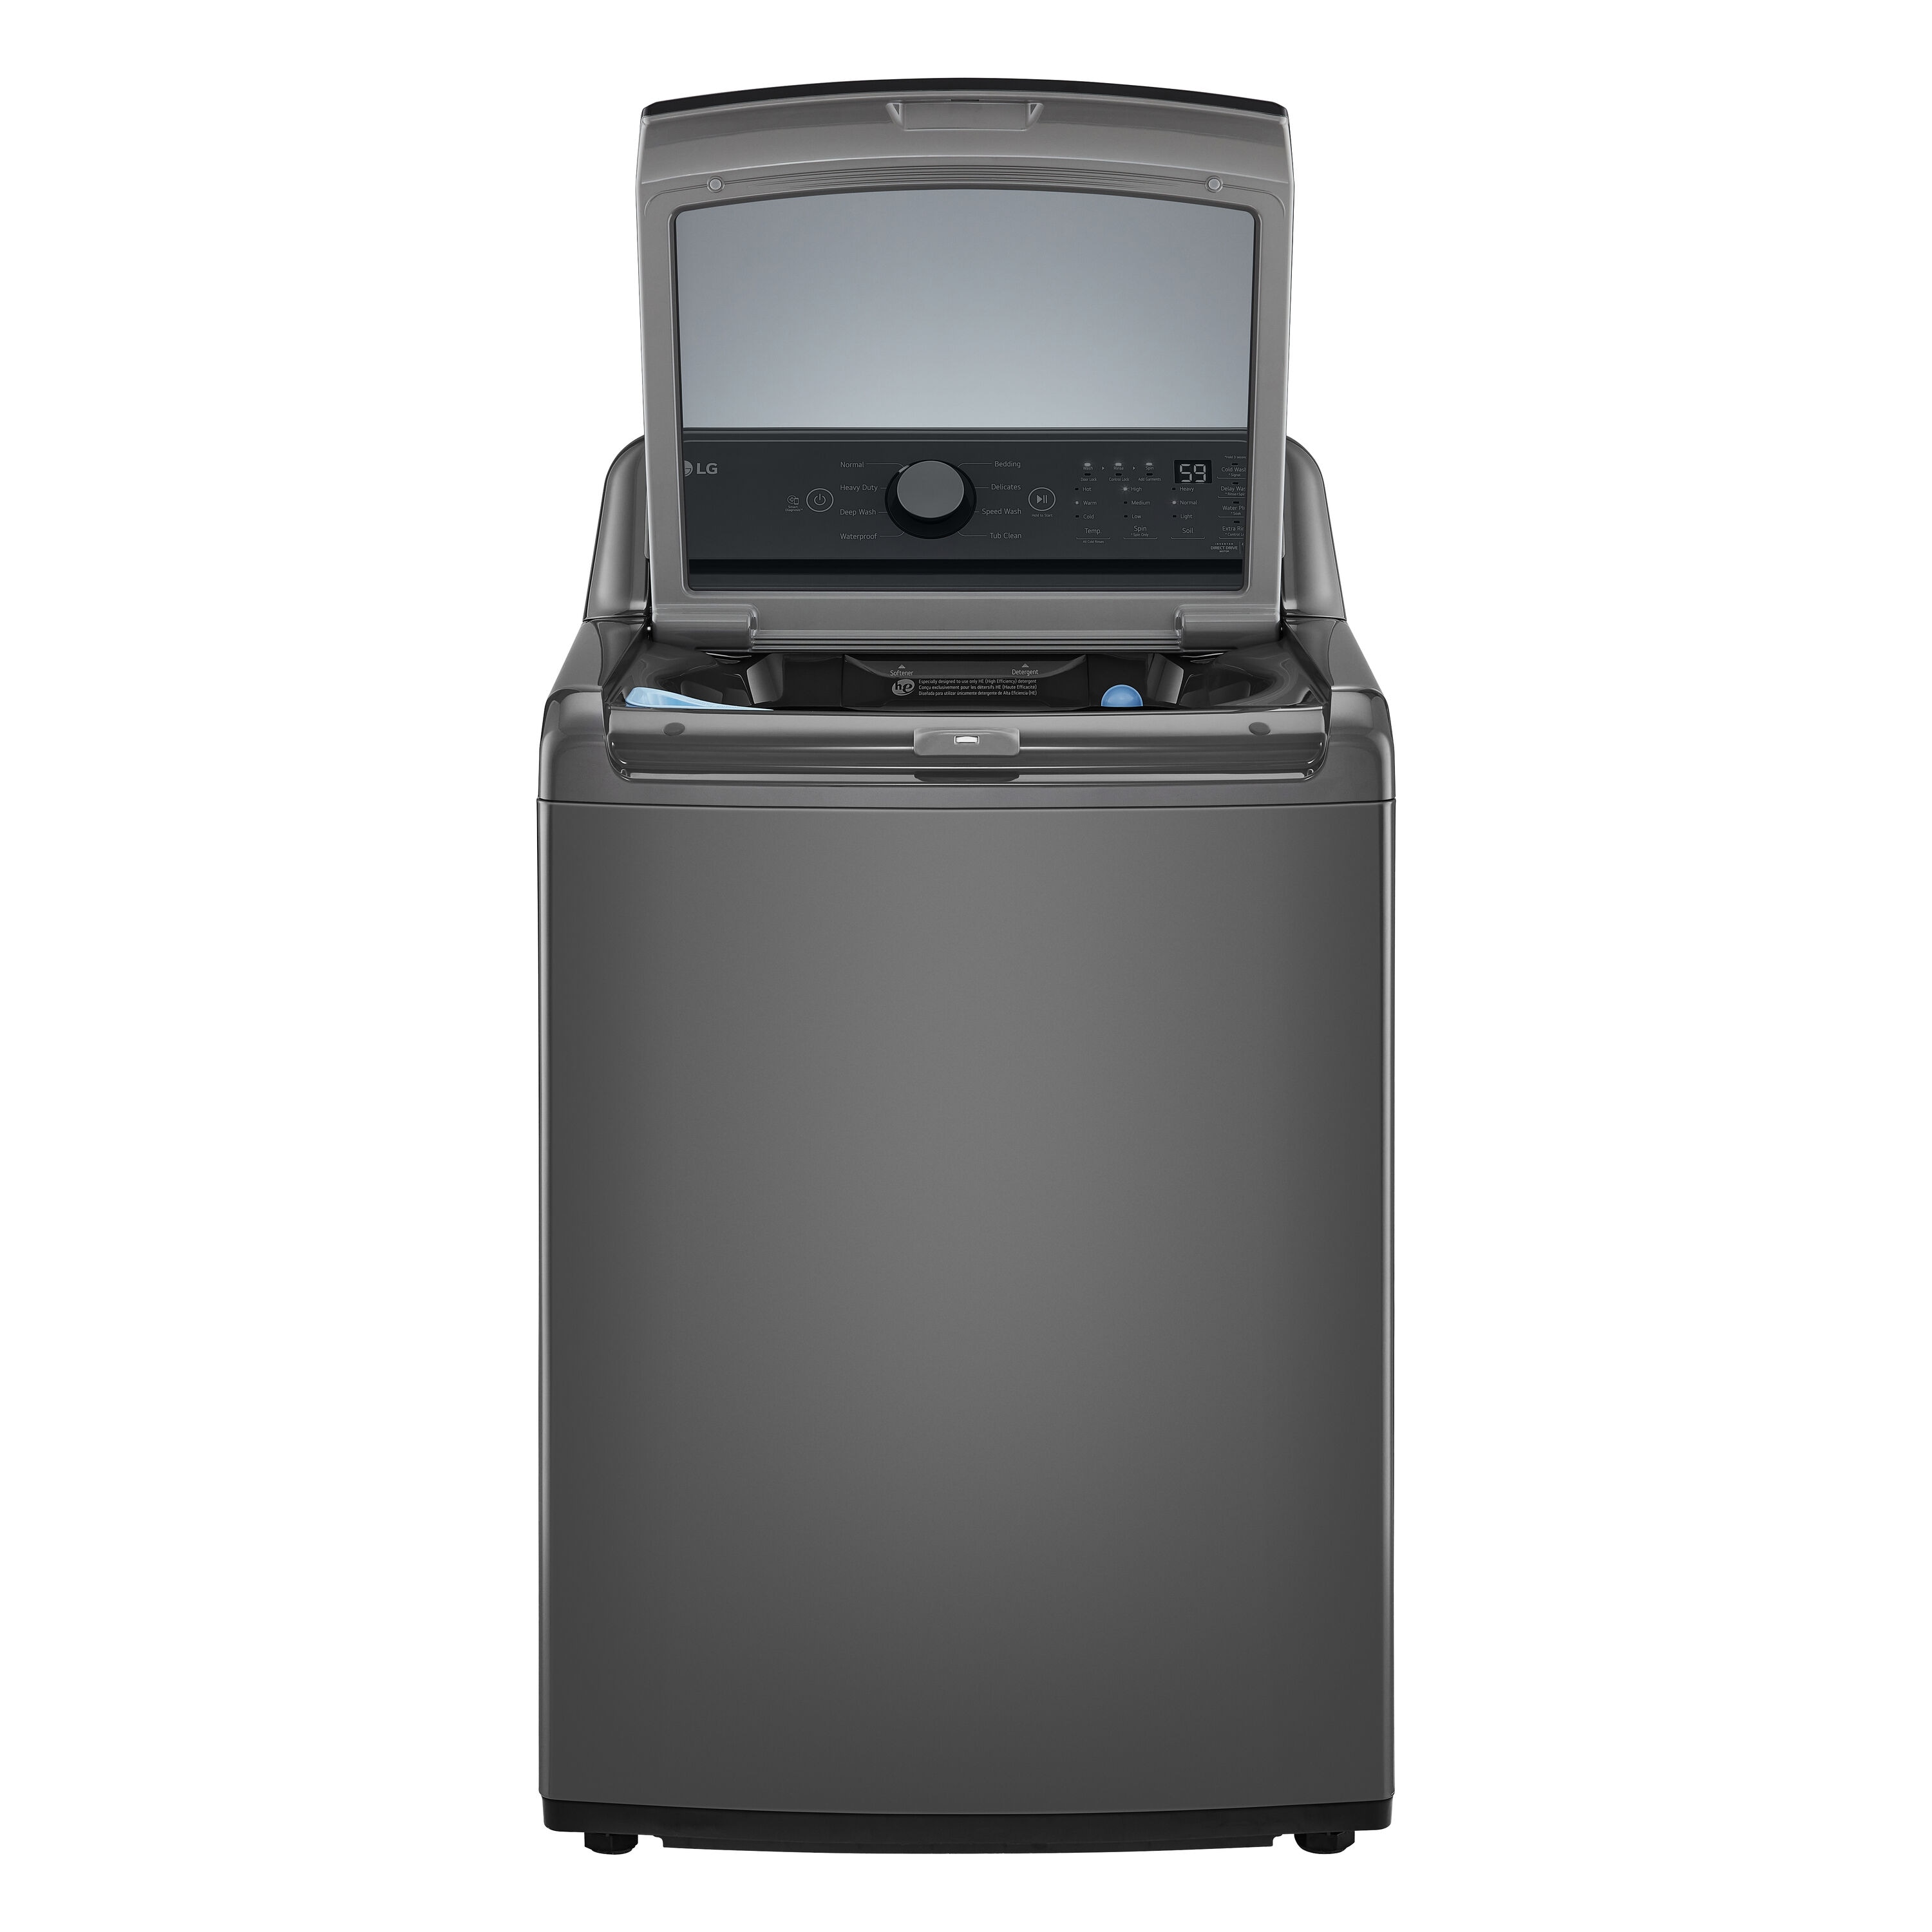 LG 5-cu ft Efficiency Impeller Top-Load Washer (Matte Black) ENERGY STAR in the Top-Load department at Lowes.com